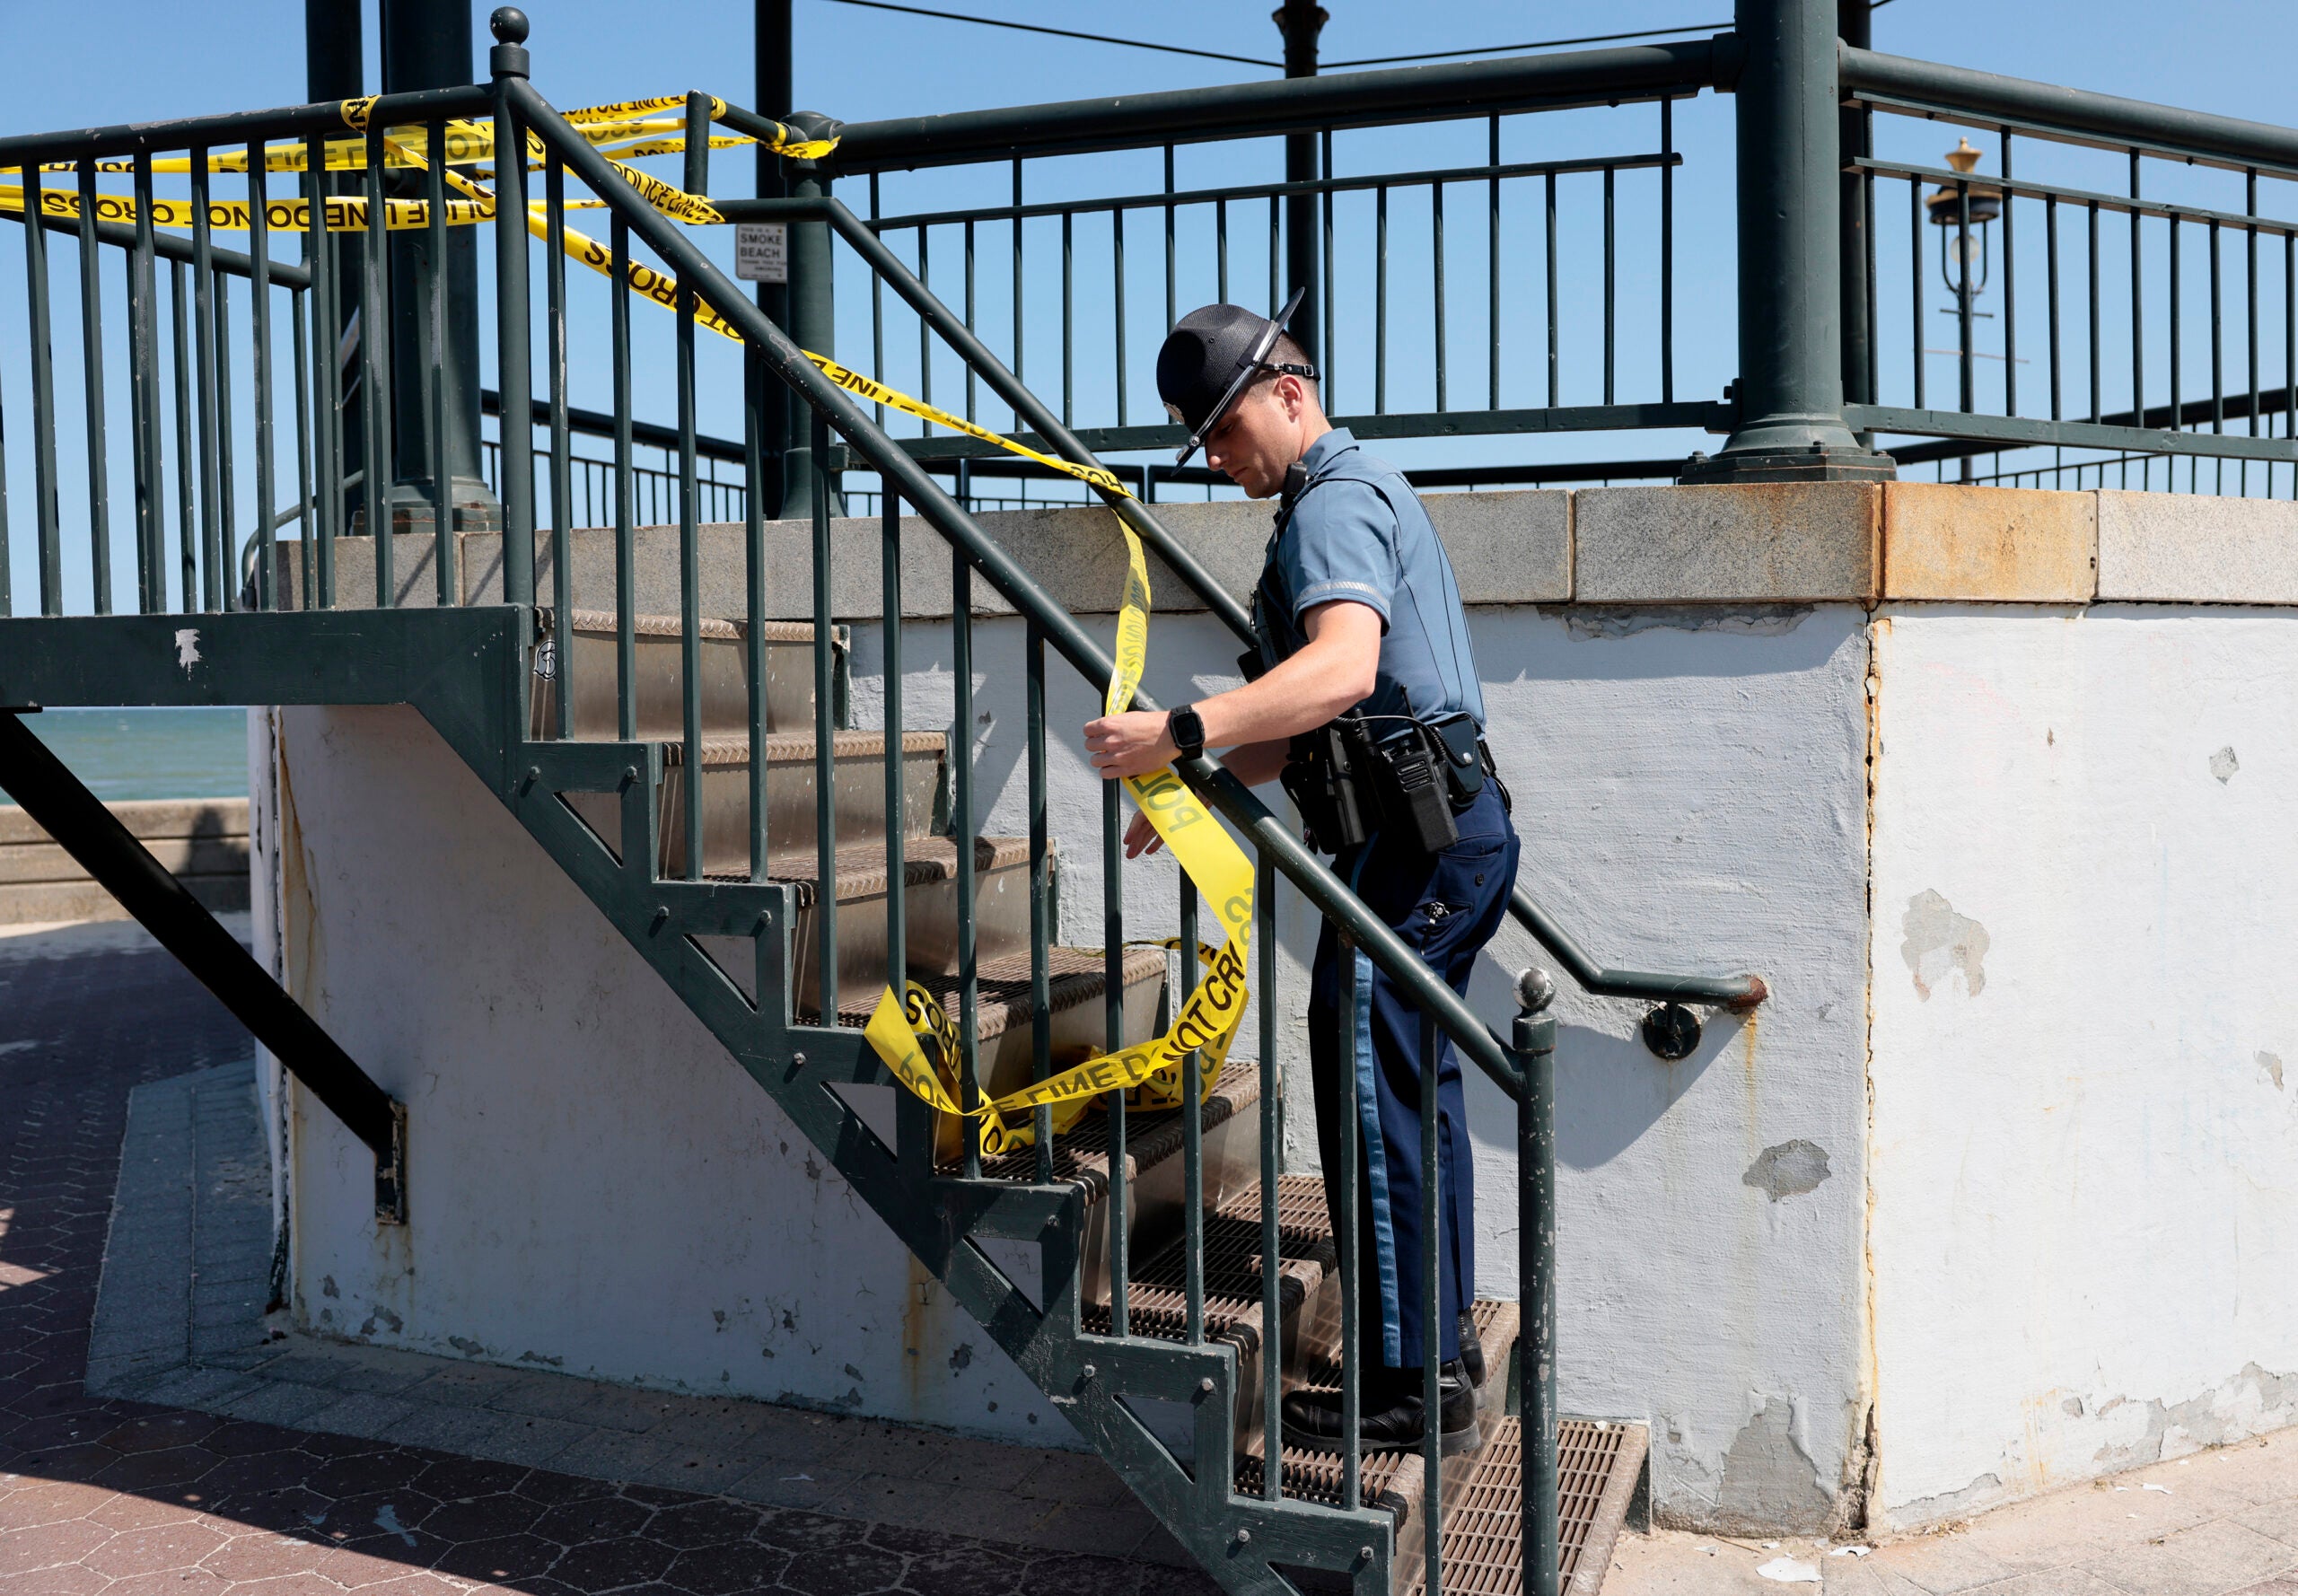 A State trooper puts up yellow tape on the Revere Beach bandstand.